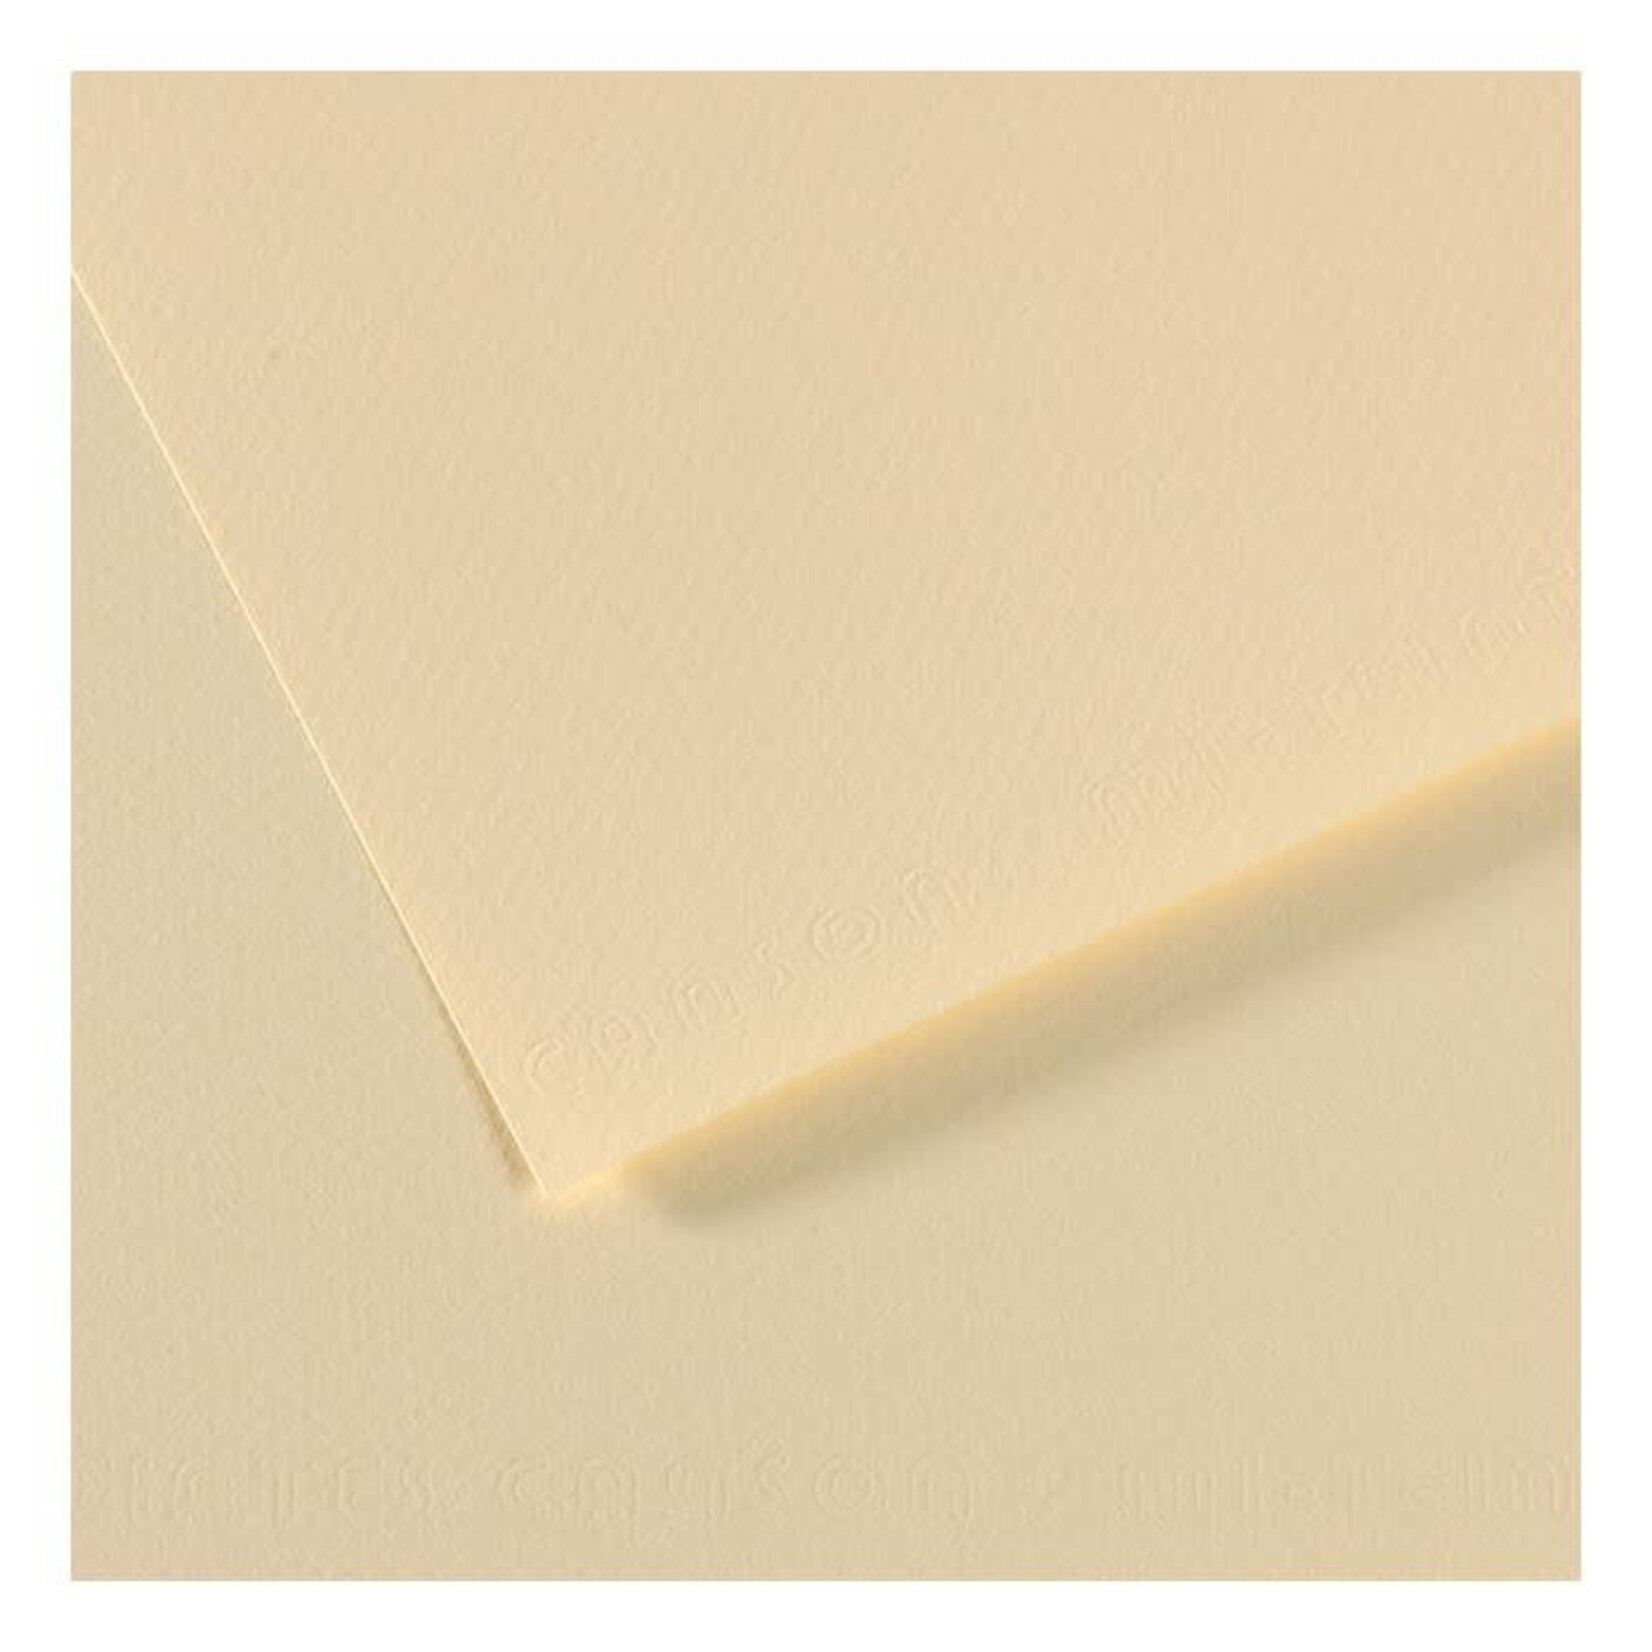 Canson Mi-Teintes Paper Sheets, 19'' x 25'', Pale Yellow